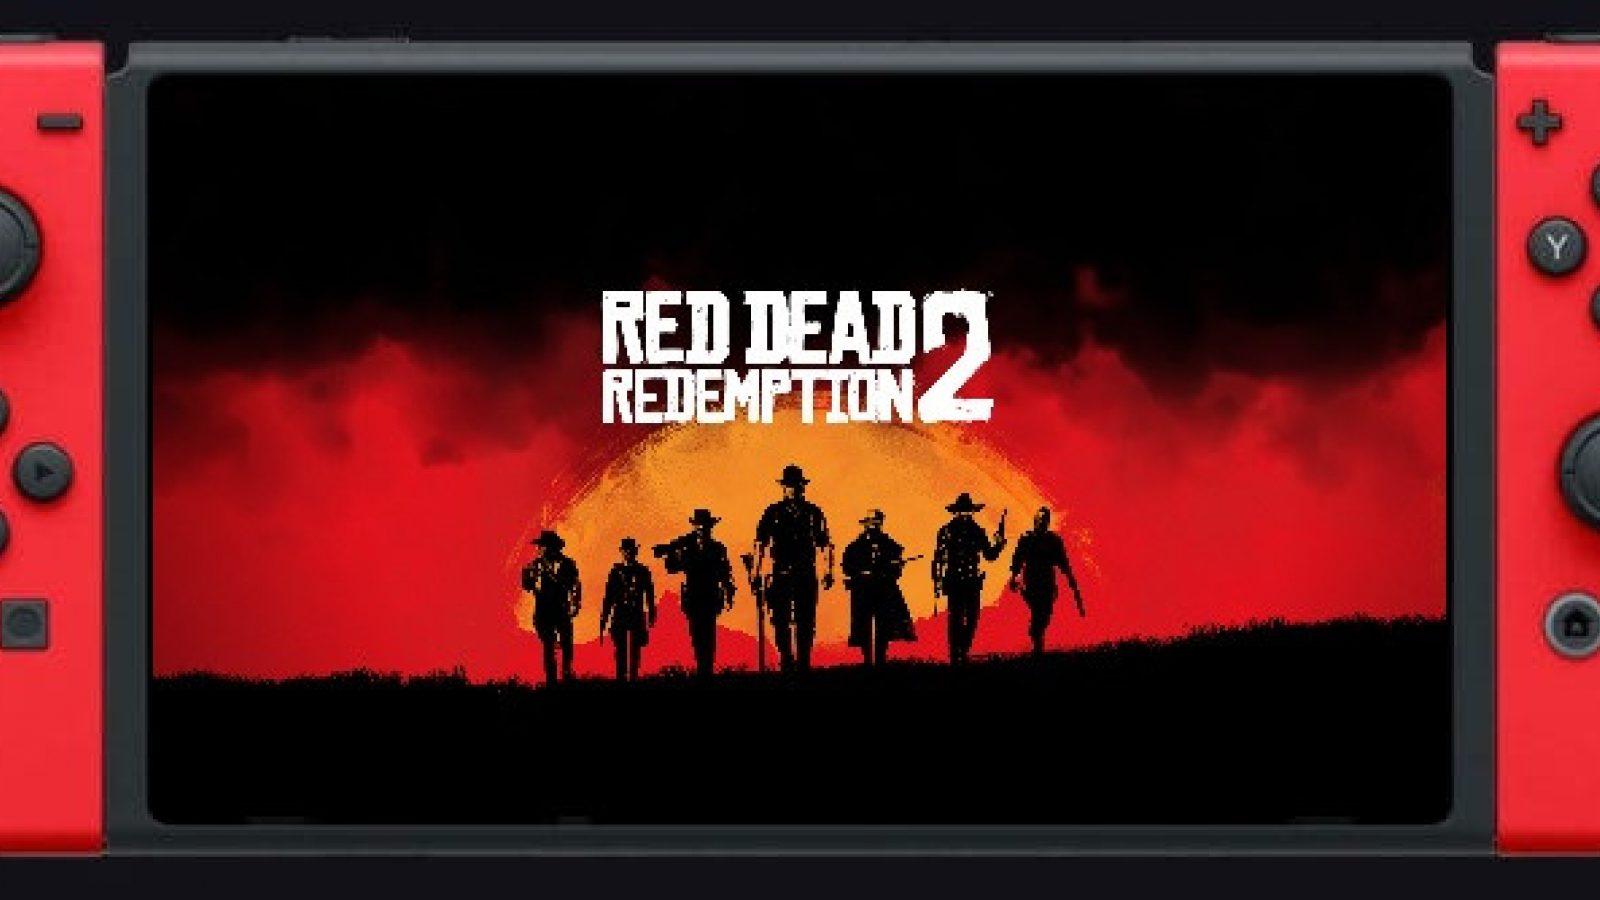 Red Dead Redemption' has launched on PS4 and Nintendo Switch